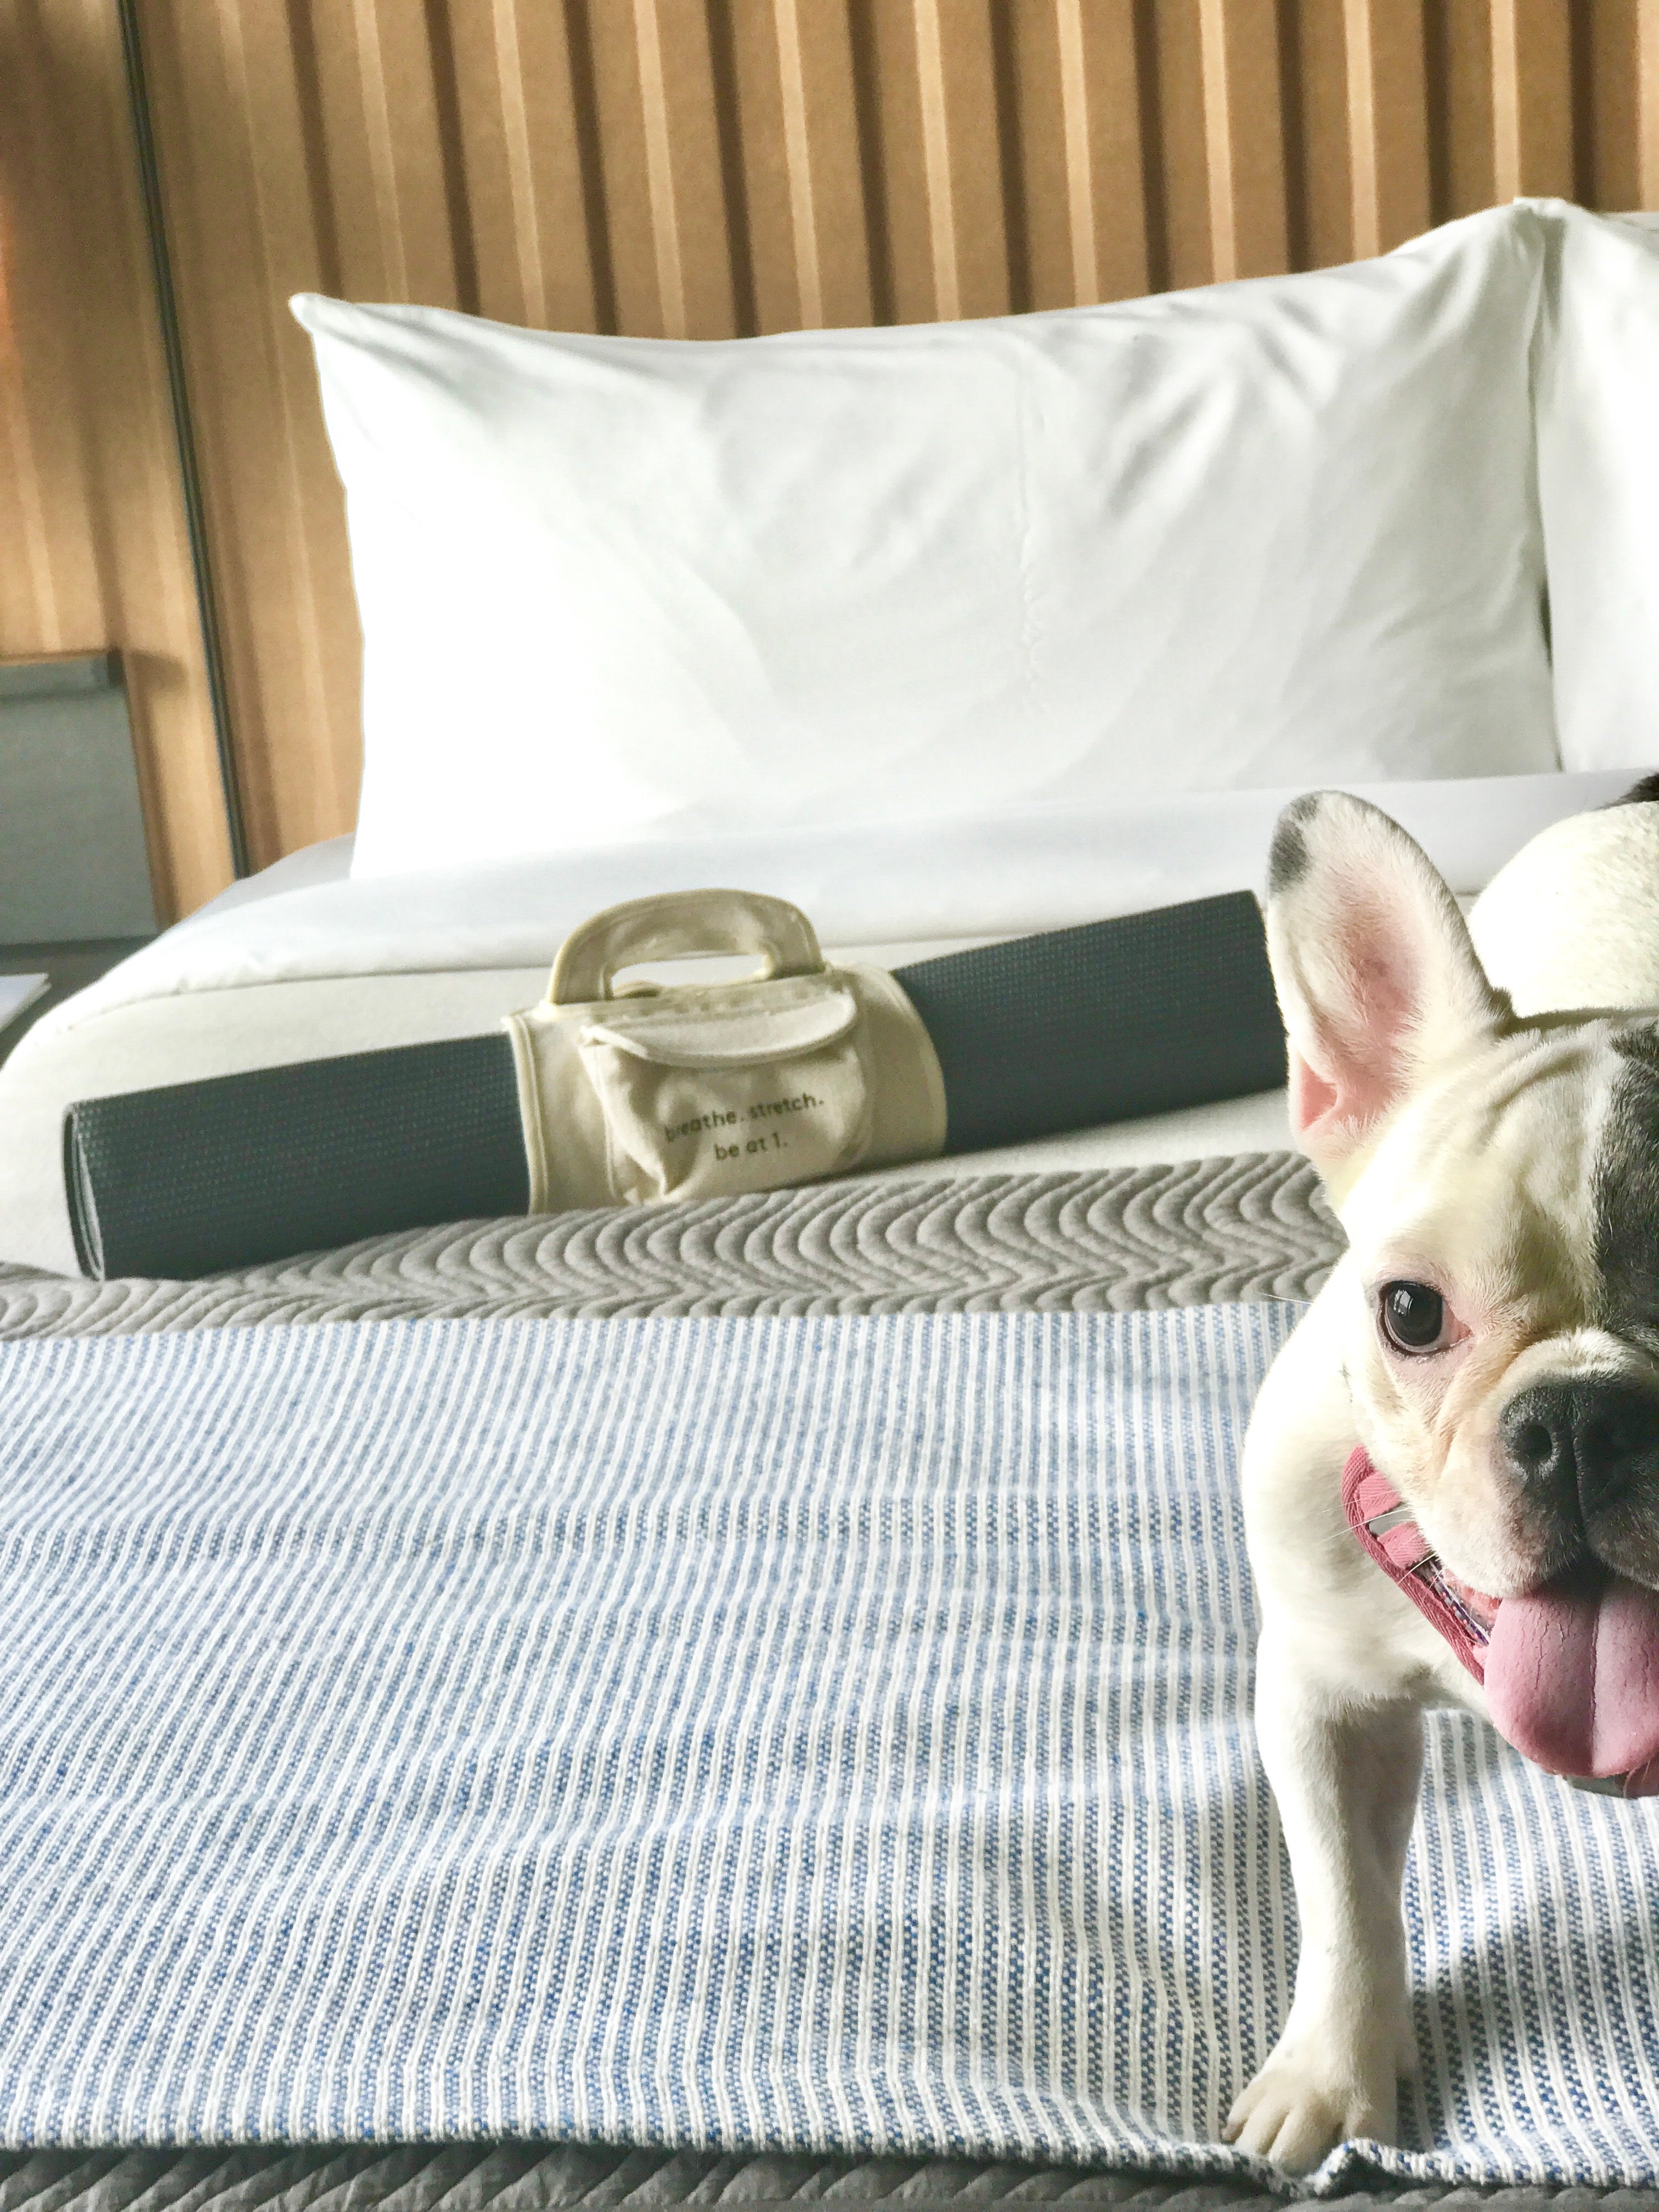 The Good Life: These 5 Getaways Are Perfect For Your Globe-Trotting Pooch